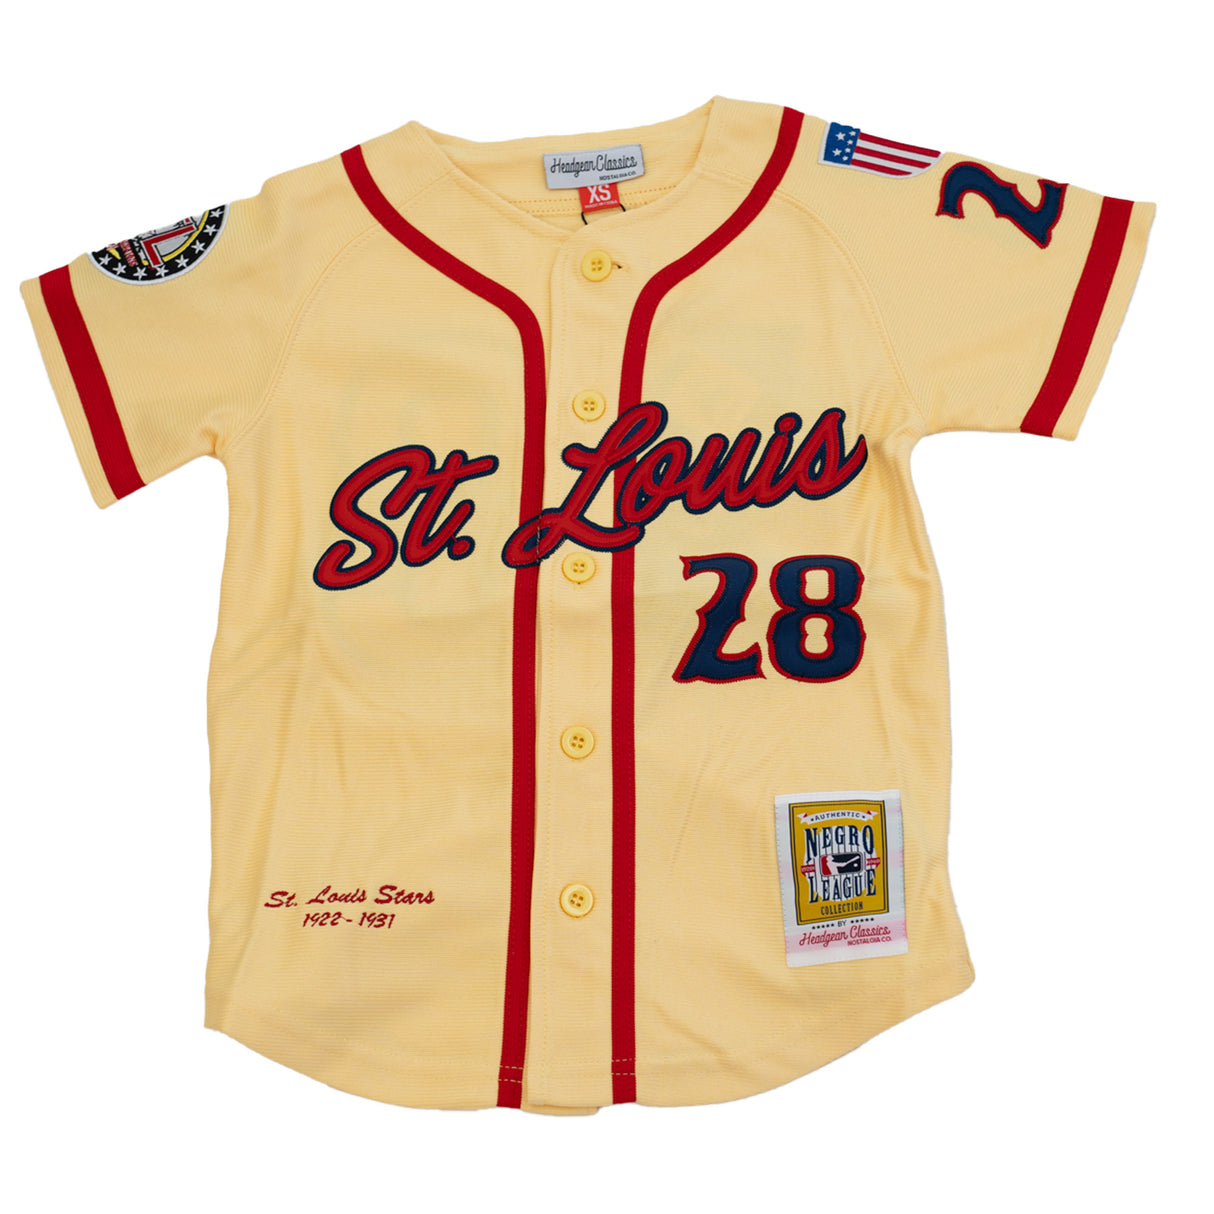 YOUTH ST LOUIS STARS BUTTON DOWN BASEBALL JERSEY